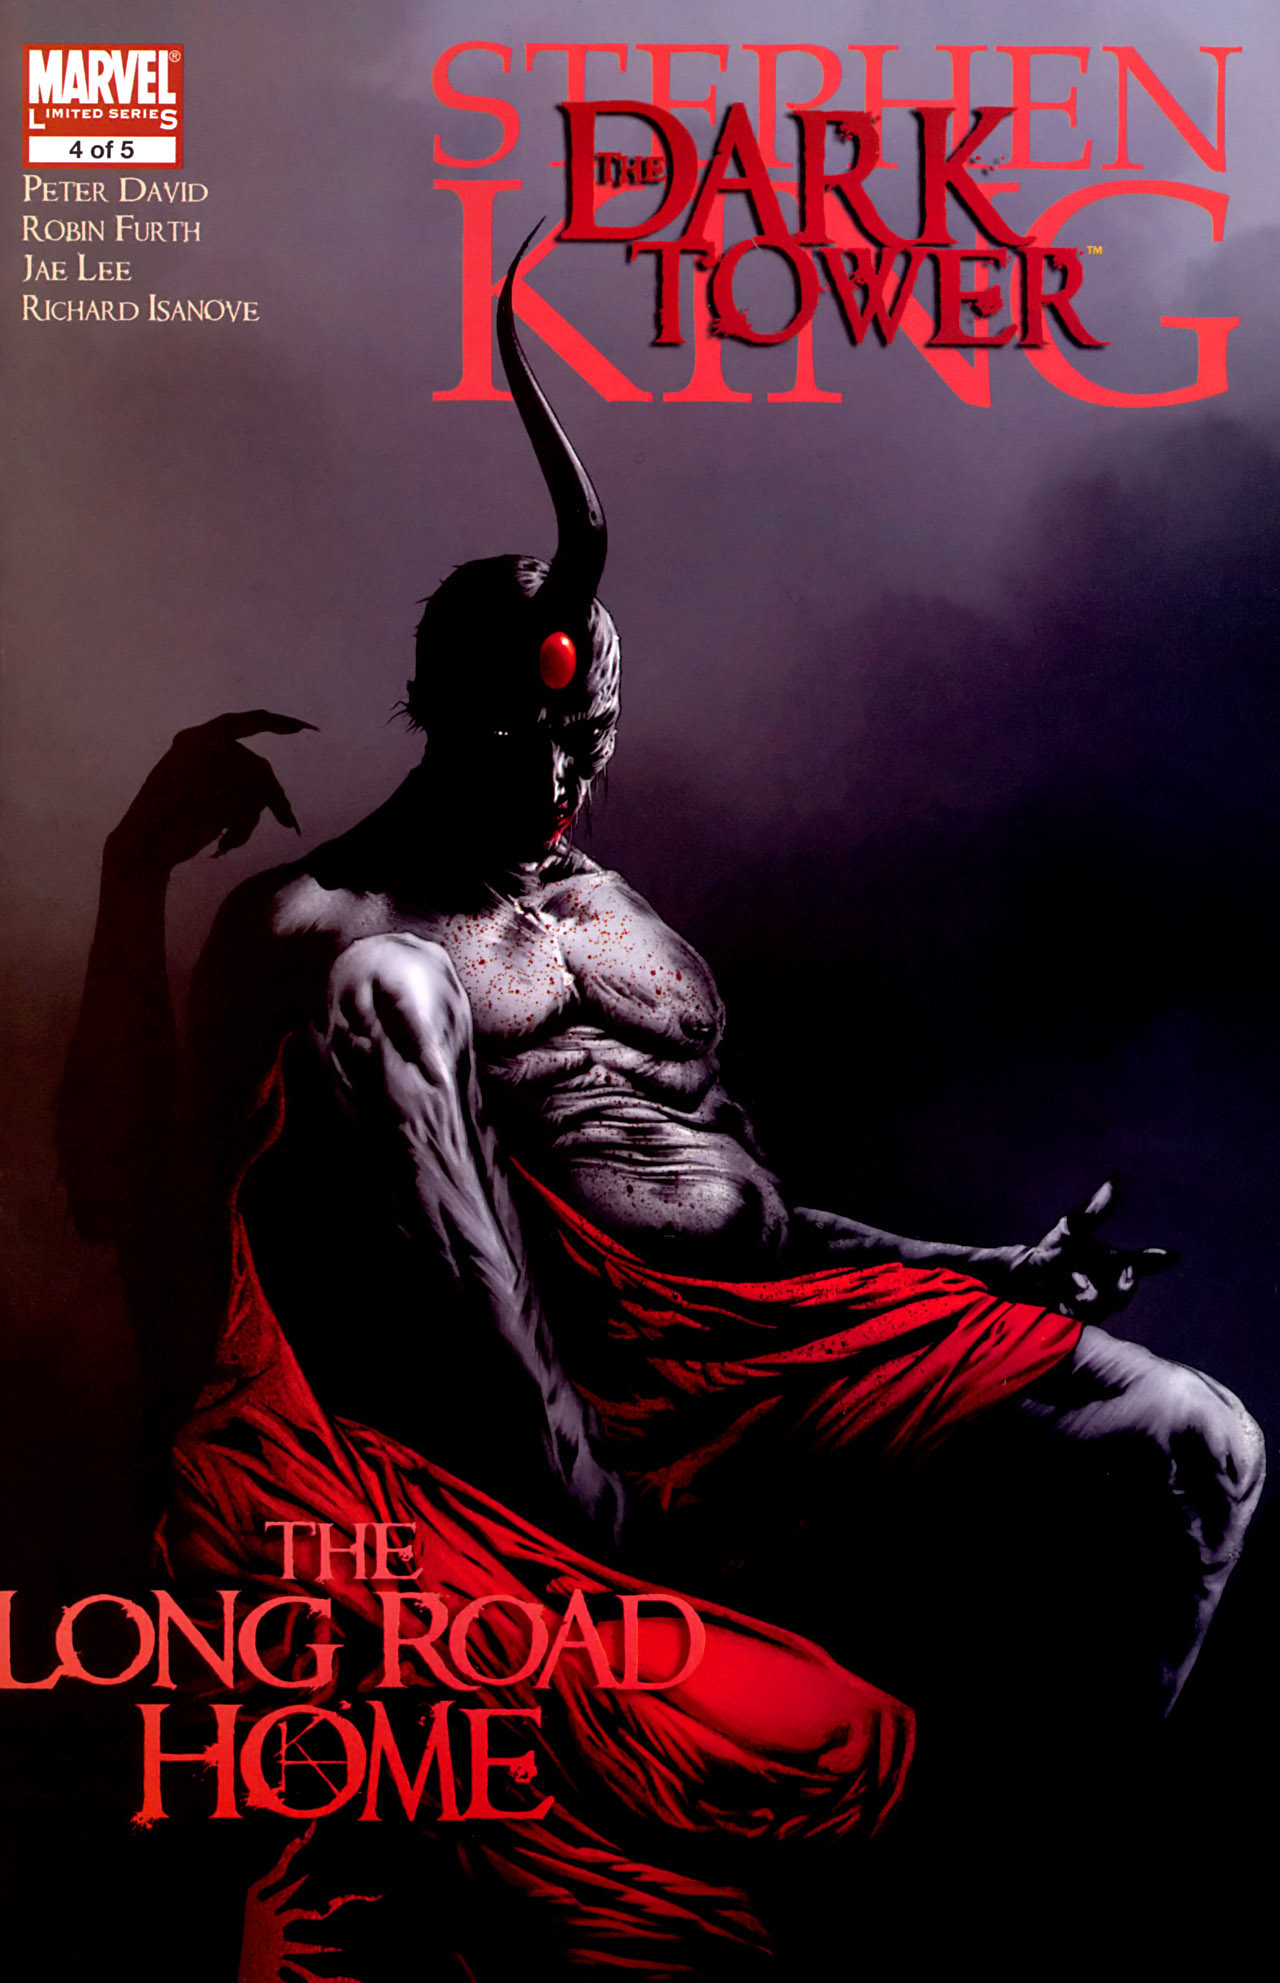 Dark Tower: The Long Road Home #4 - Part Four